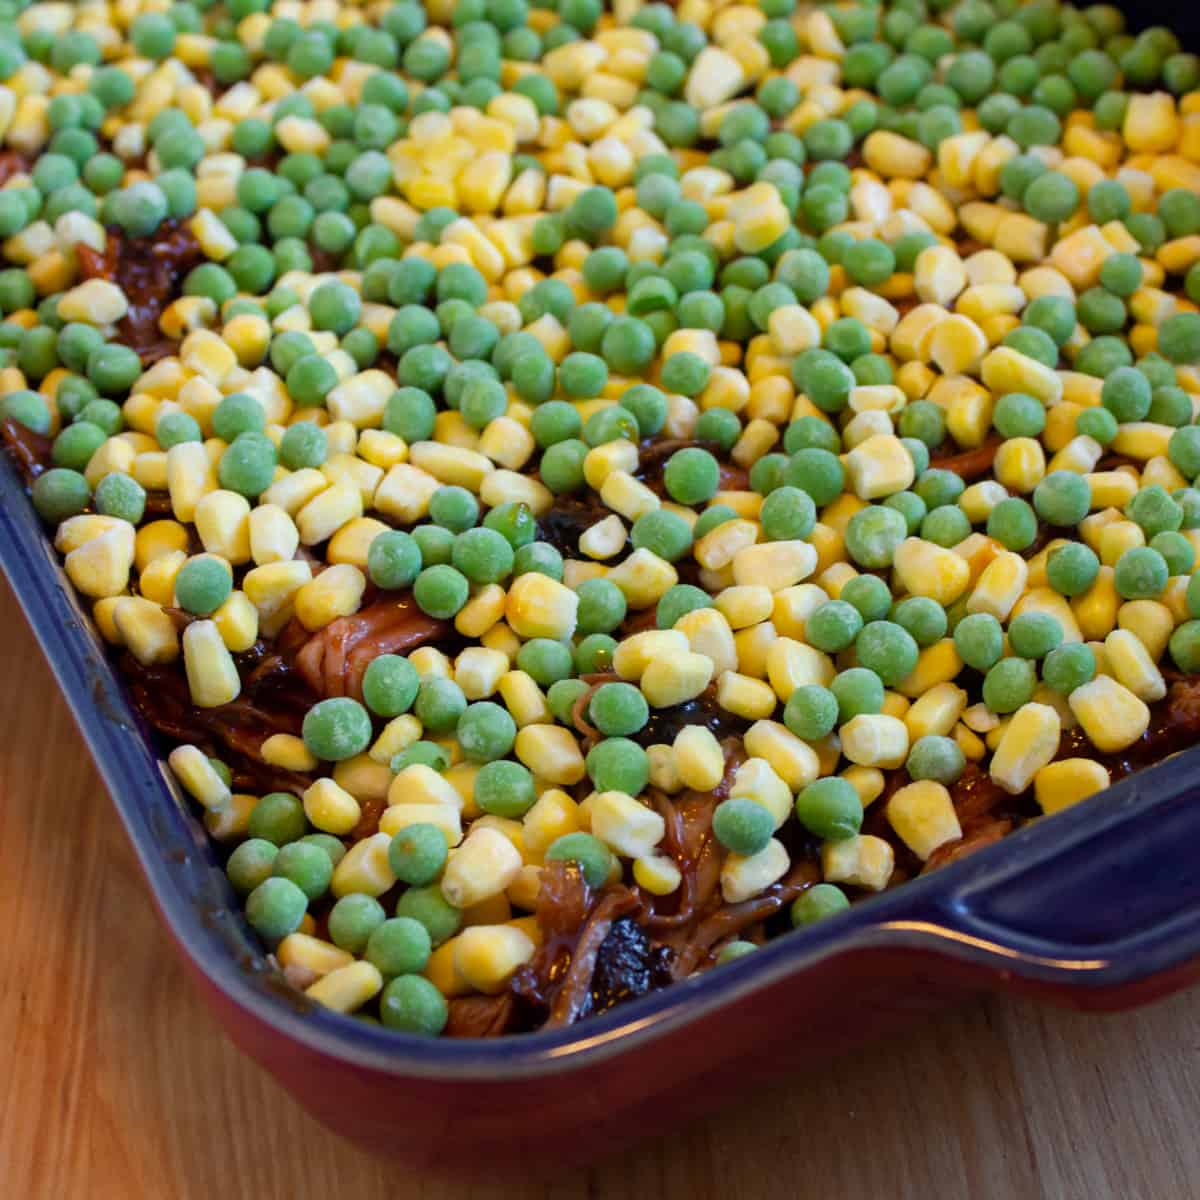 Frozen peas and corn spread over cooked meat.